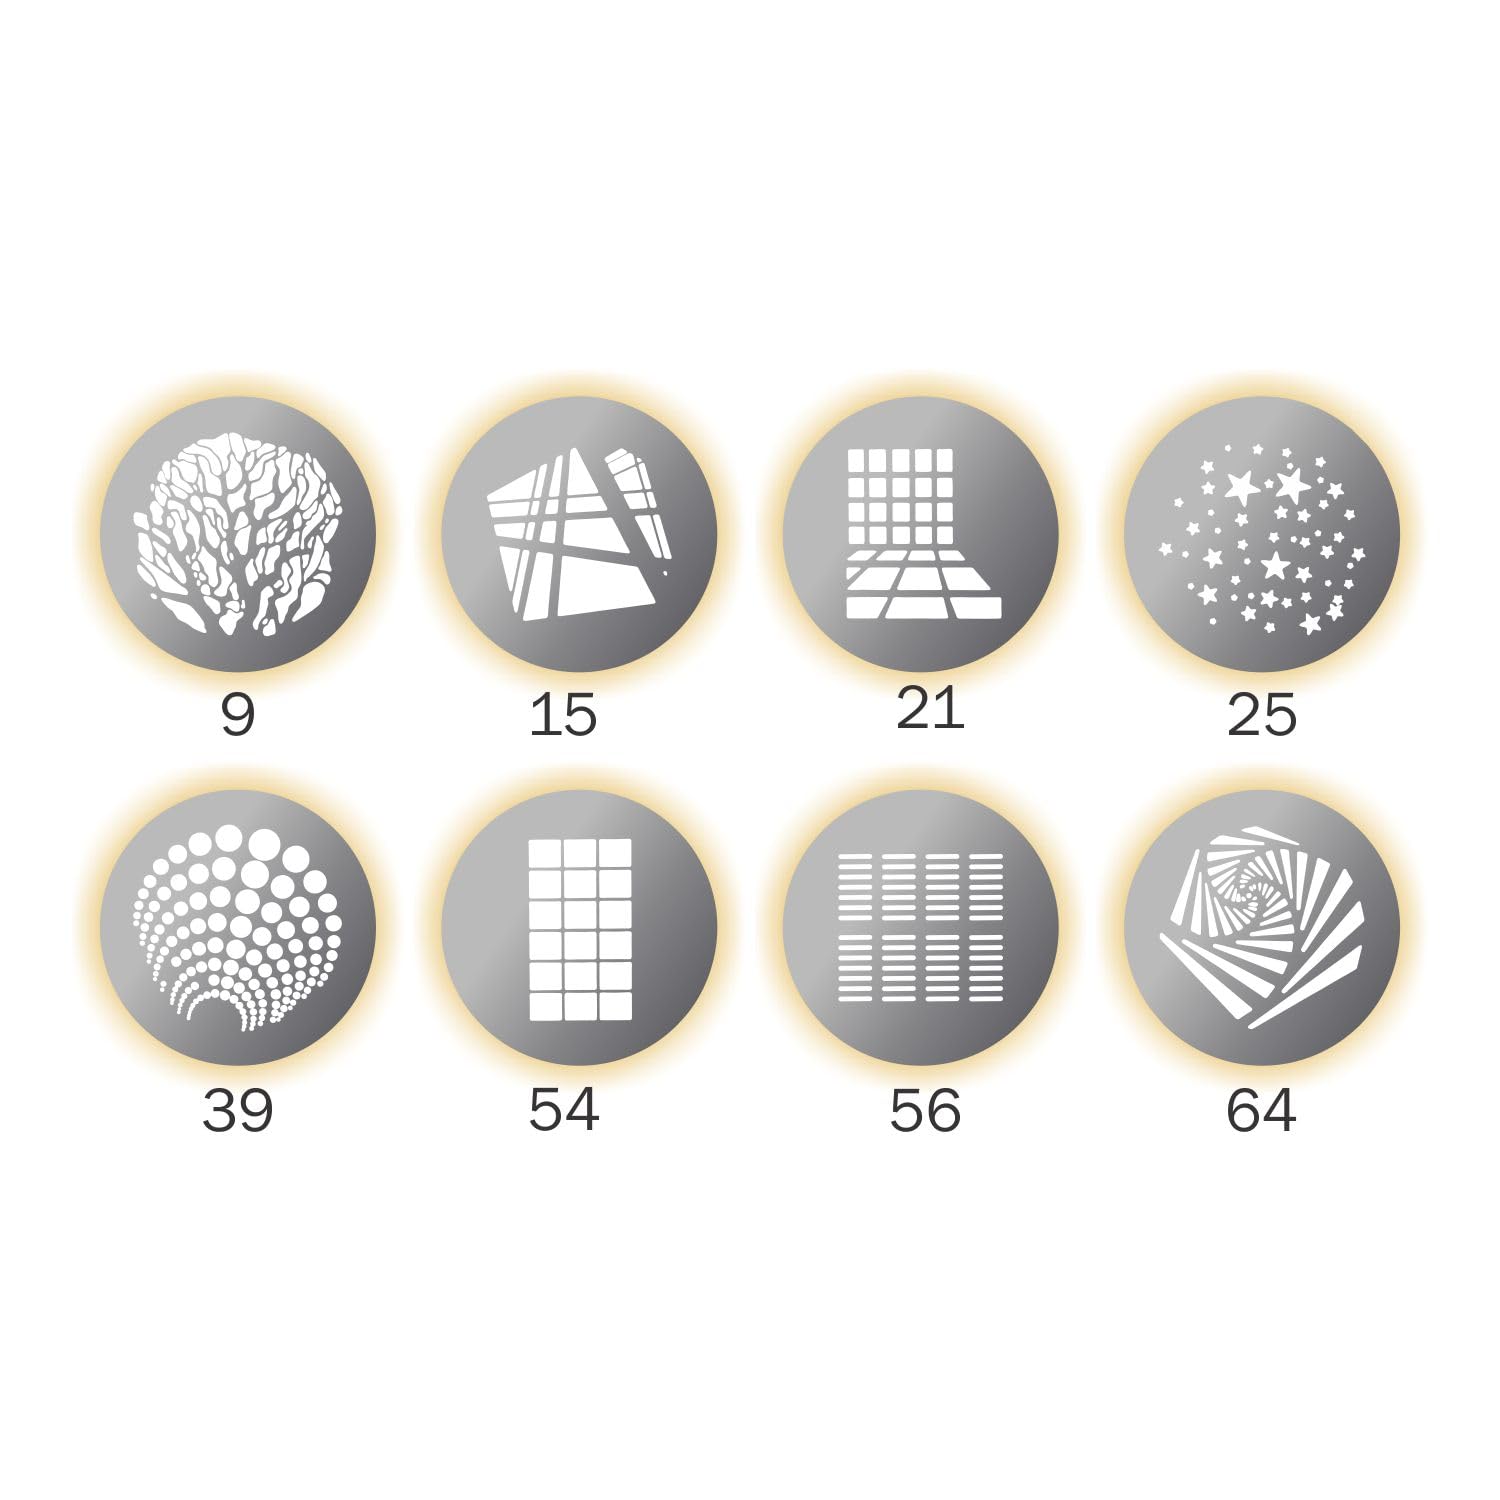 Digitek (DGS 001)Stainless Steel GOBO Pattern Kit with 8 Creative Pattern Effect for Optical Snoot